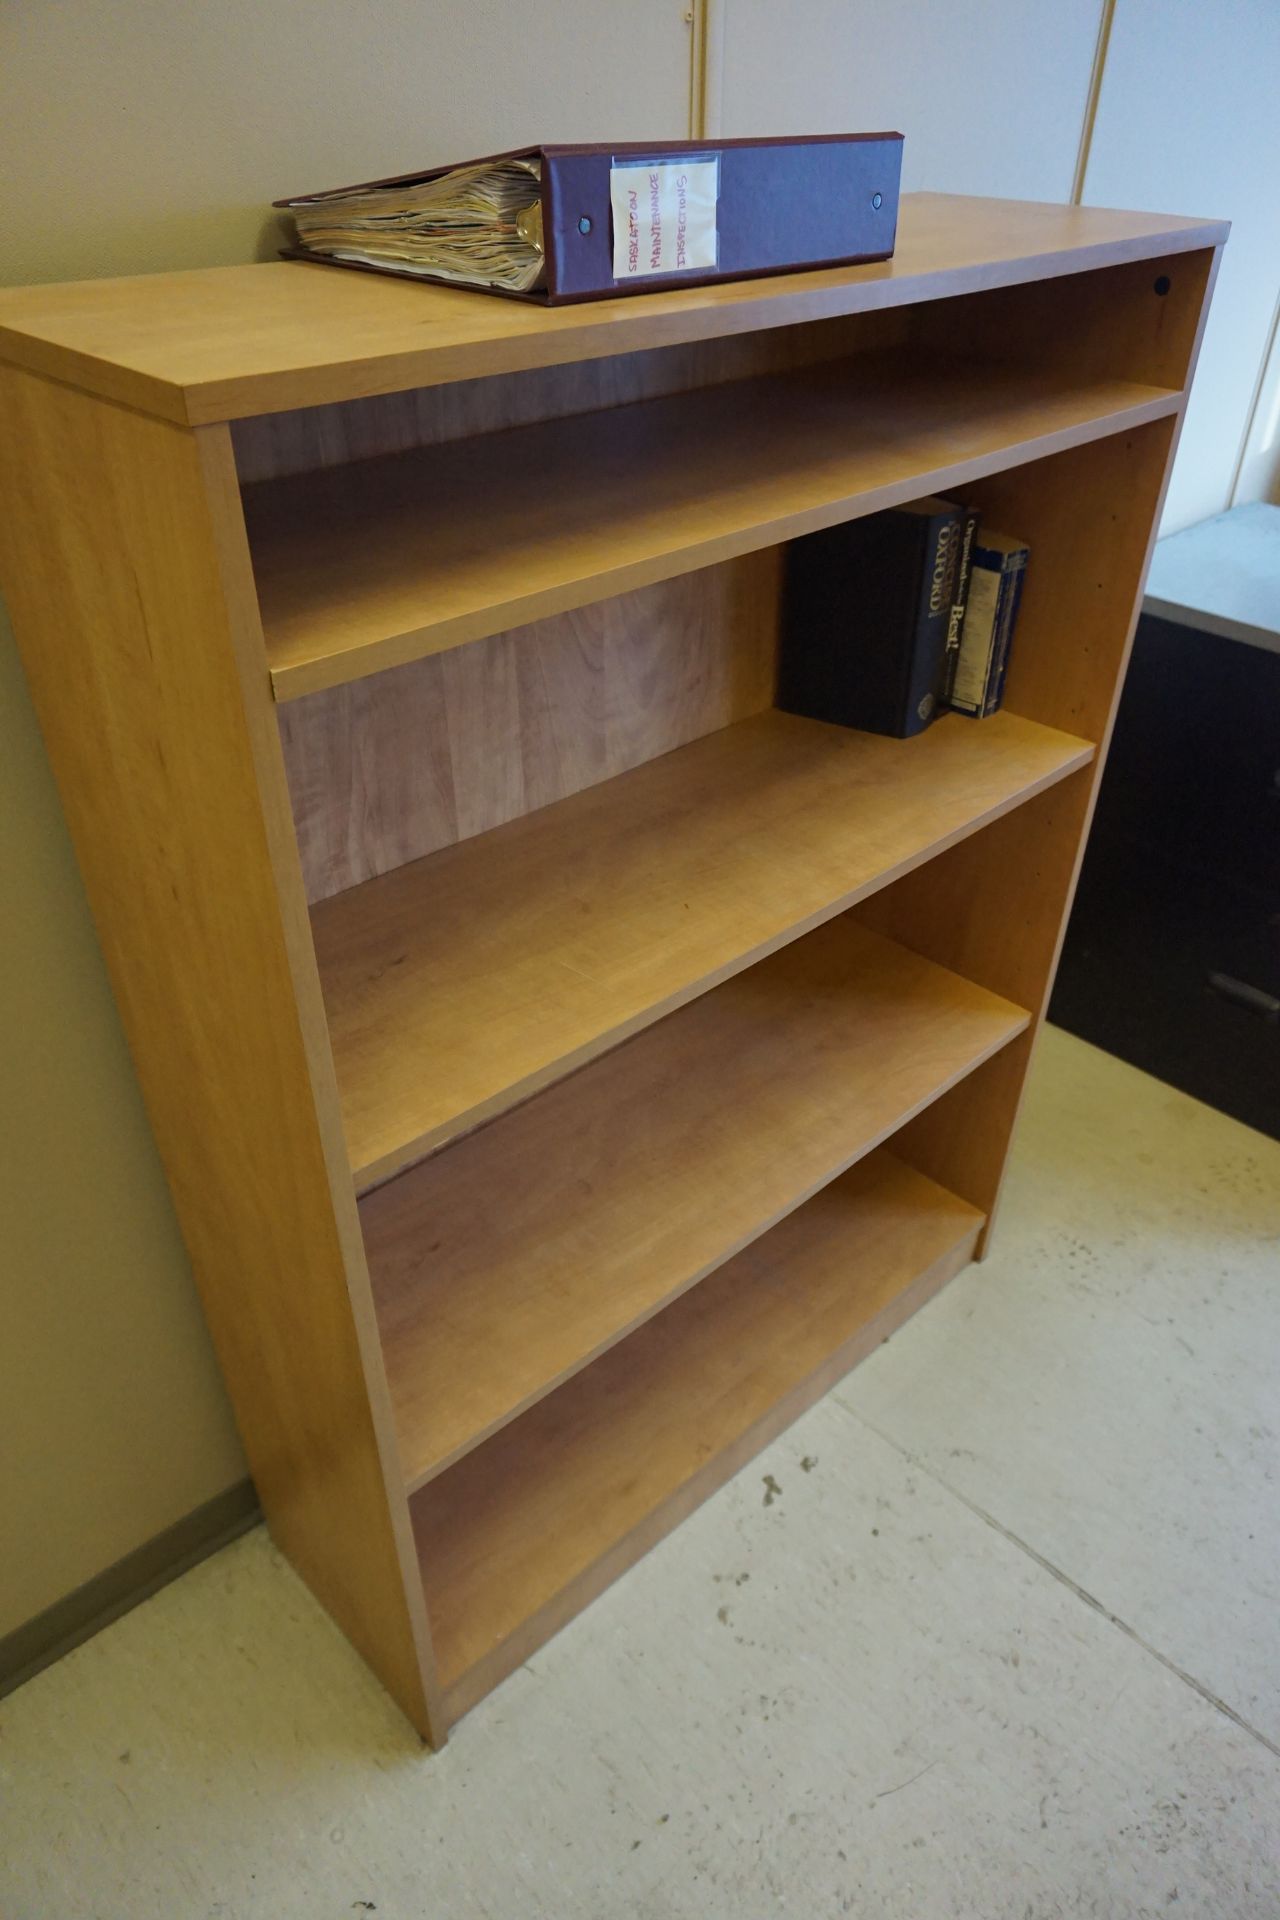 L-Shaped Desk with Bookshelf & Chairs - Image 2 of 2